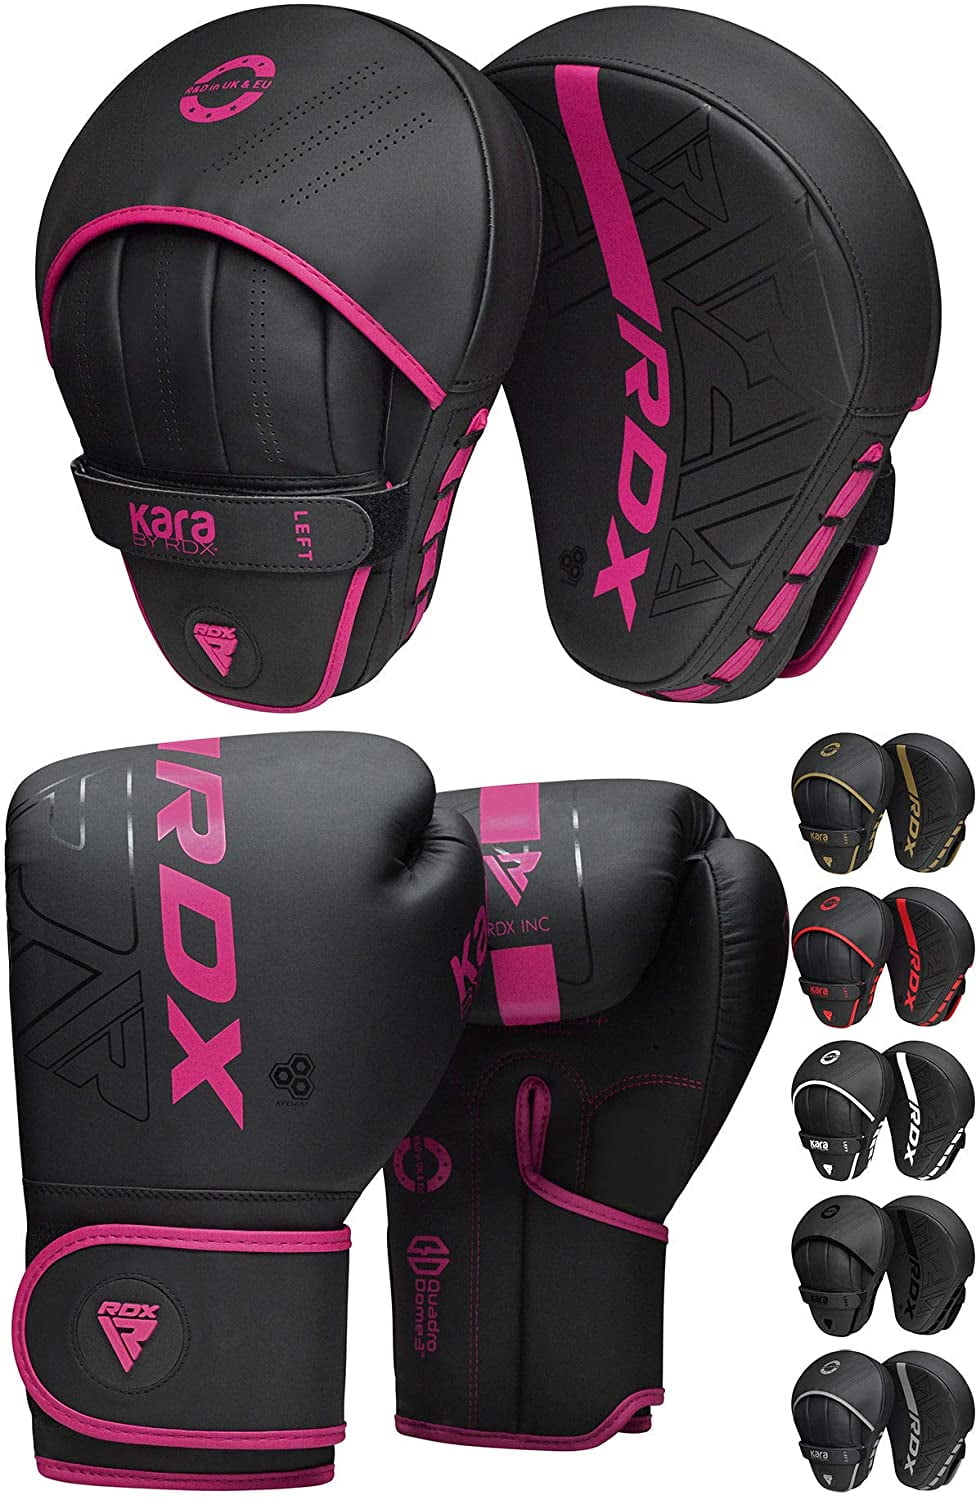 Kids Boxing Gloves And Pads Curved Focus Pad Hook and Jab Punch Bag Kick MMA RAX 